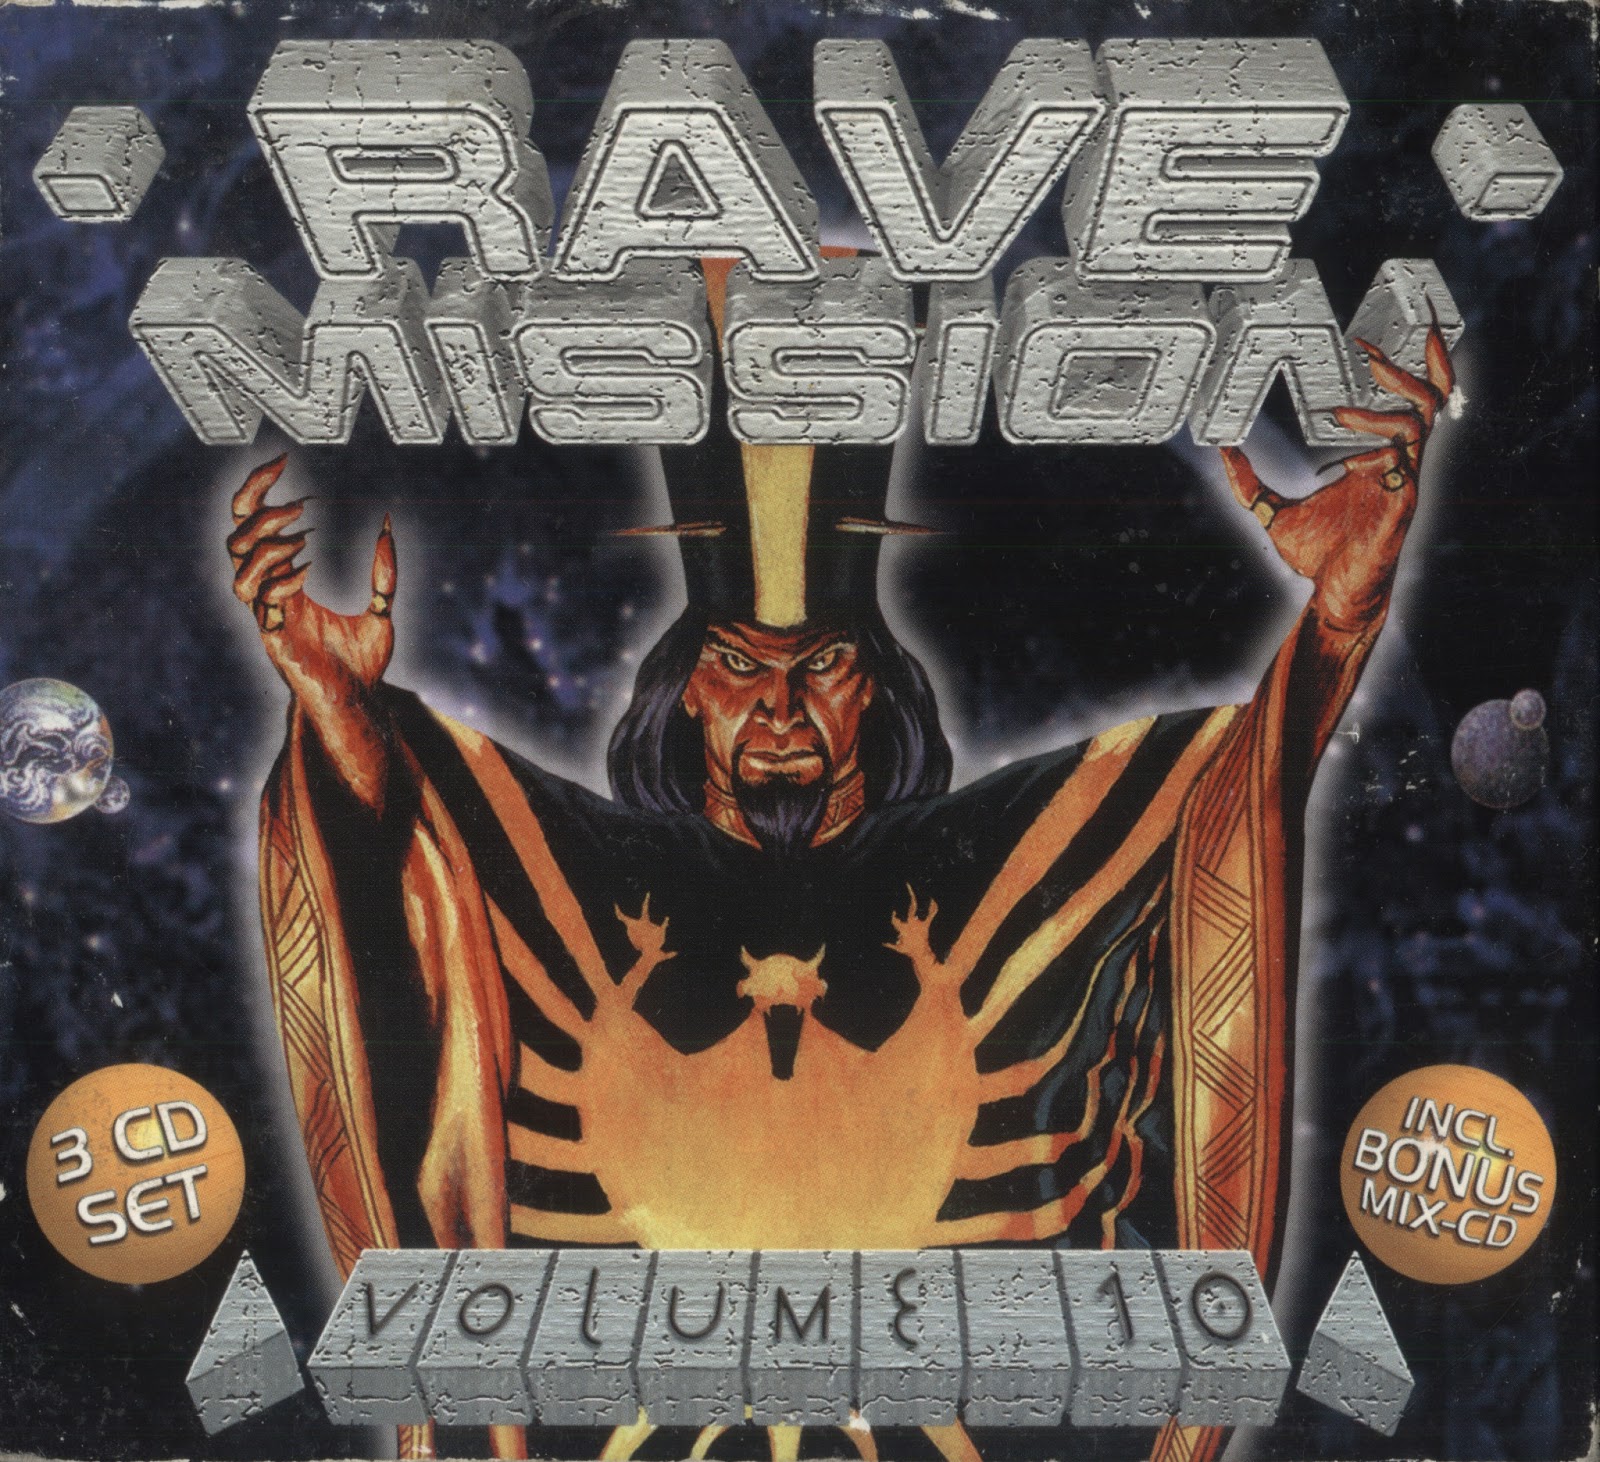 dance of the 90's: Rave Mission Vol. 10